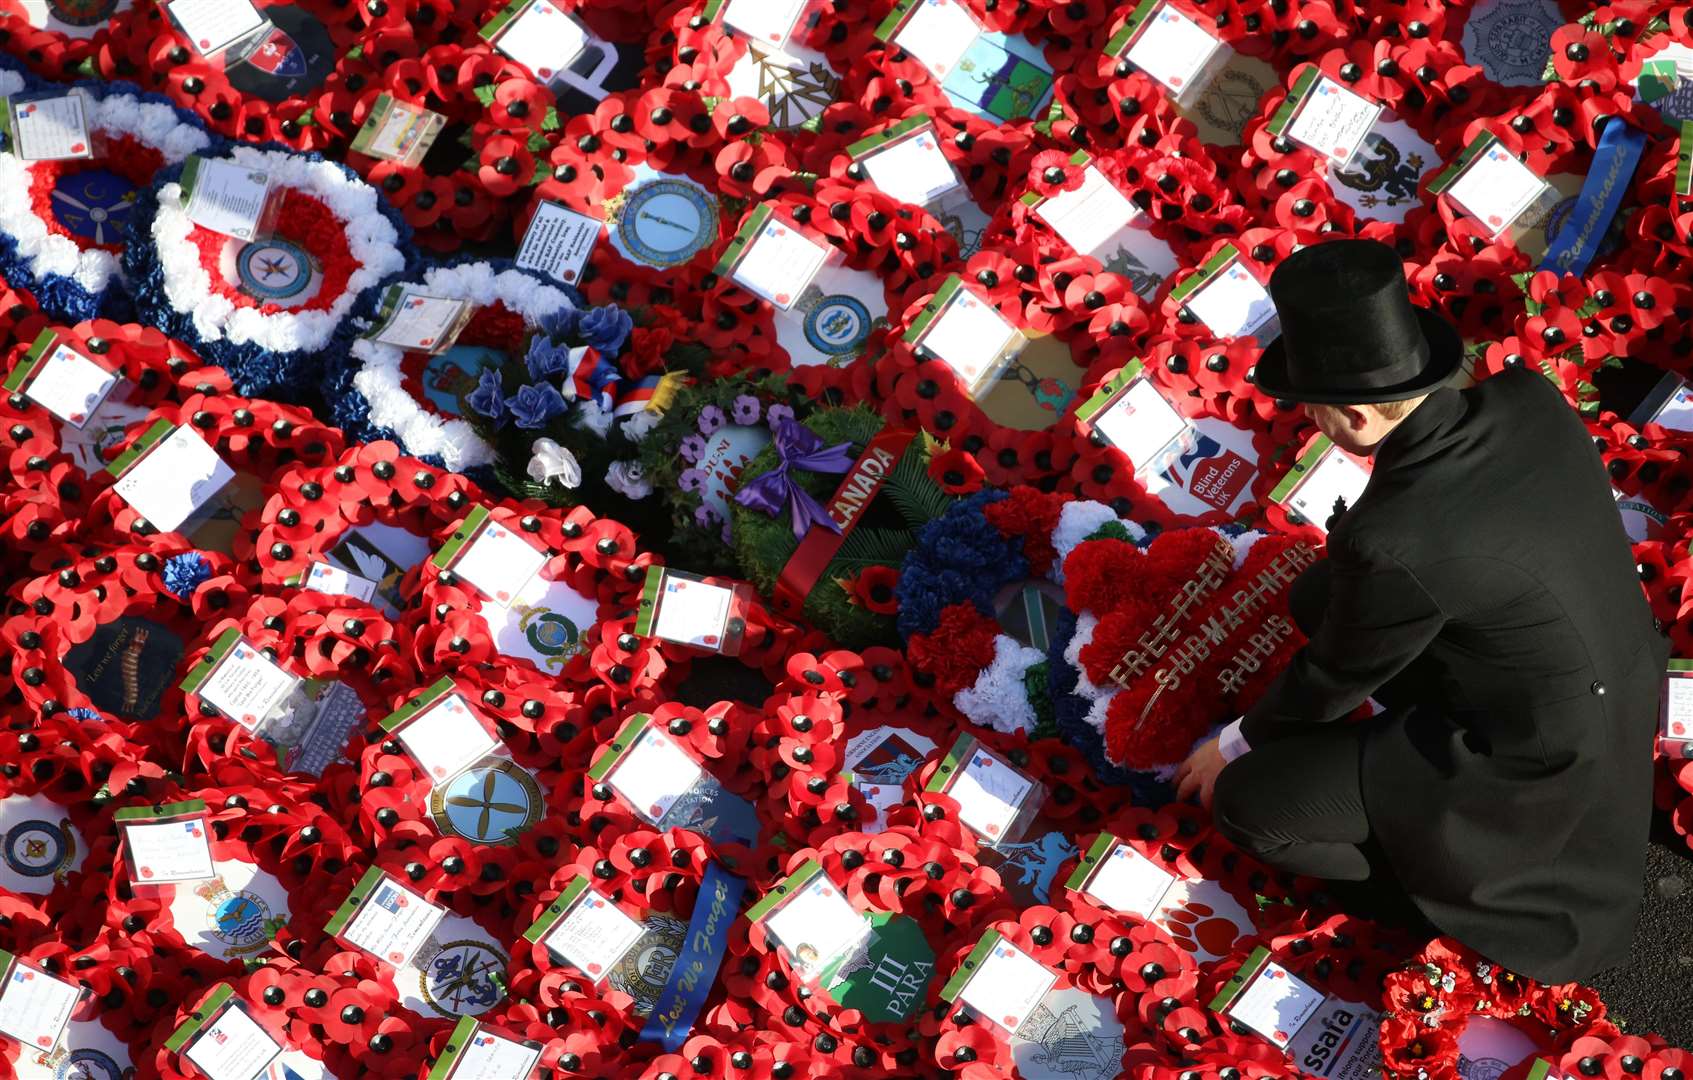 The 100 veterans will be making their way to the Cenotaph in London for the remembrance service